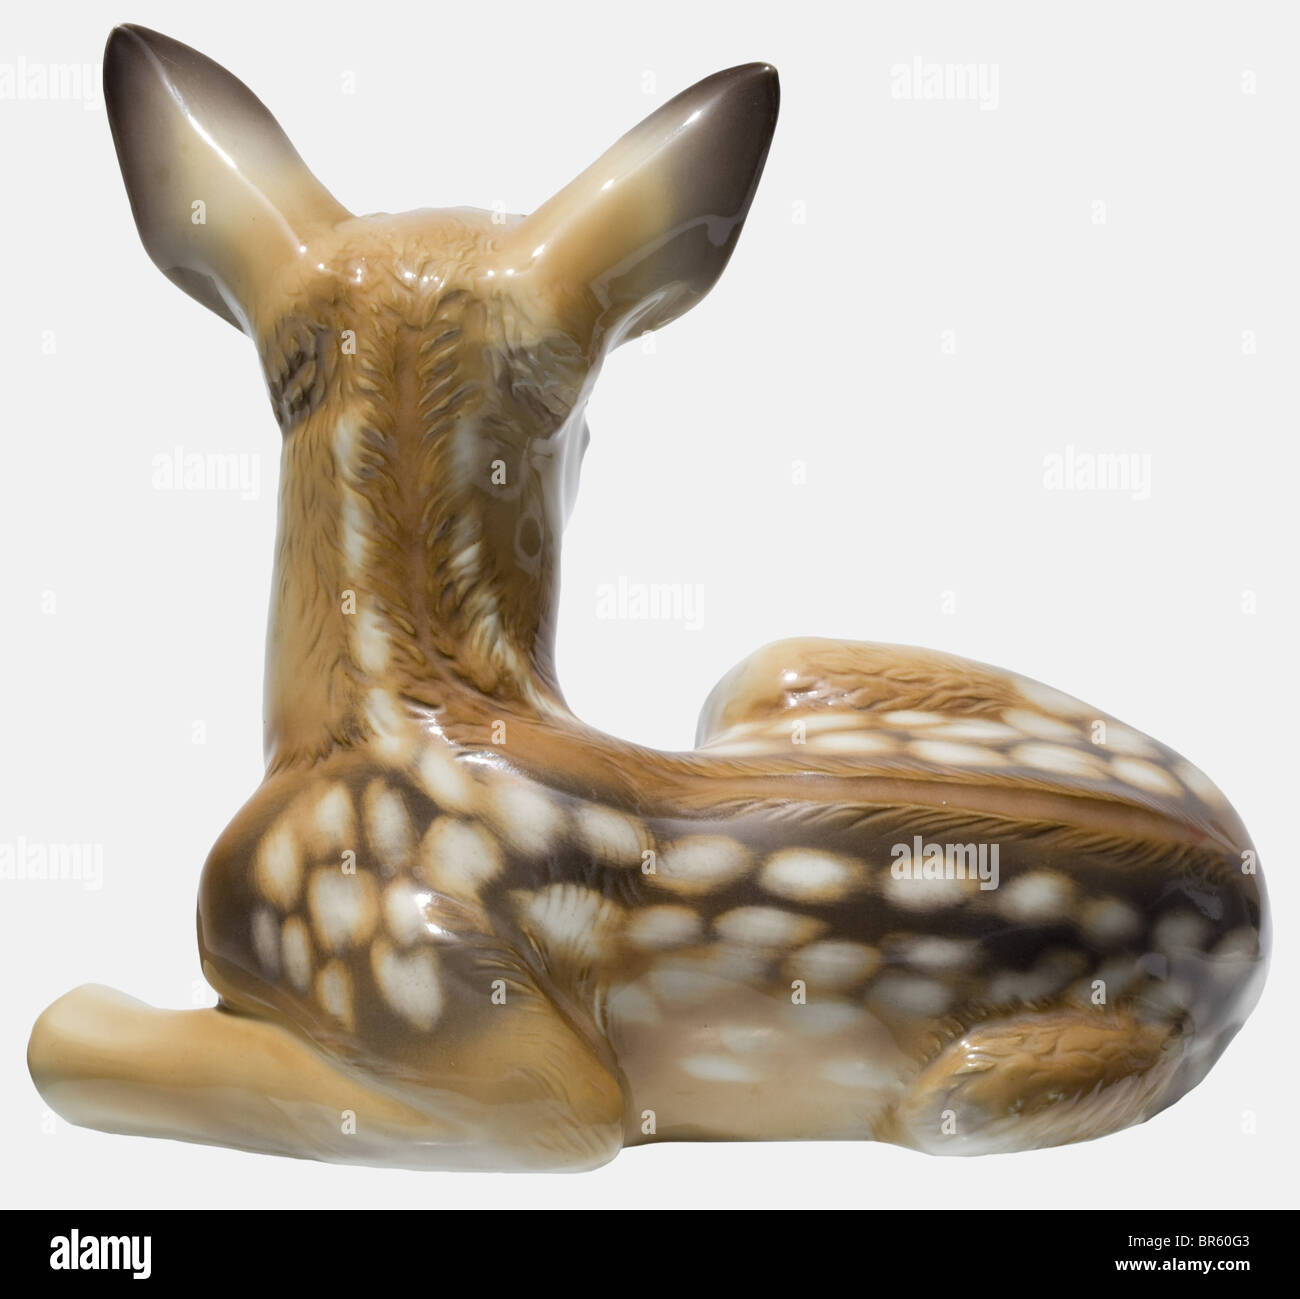 A standing and a recumbant roe deer fawn, coloured versions, Allach Porcelain Factory Design by Prof. Theodor Kärner. Model numbers '41' and '84'. Each of glazed, coloured porcelain. The signature, 'Prof. Th. Kärner', and model numbers are on the bottom and the stomach respectively. The standing fawn bears the manufacturer's press mark, and the recumbant figure bears the mark in the octagon in underglaze green . Heights 28.3 and 16.2 cm. Undamaged condition. From the legacy of Prof. Theodor Kärner, with written confirmation concerning the purchase from Kärner's, Stock Photo